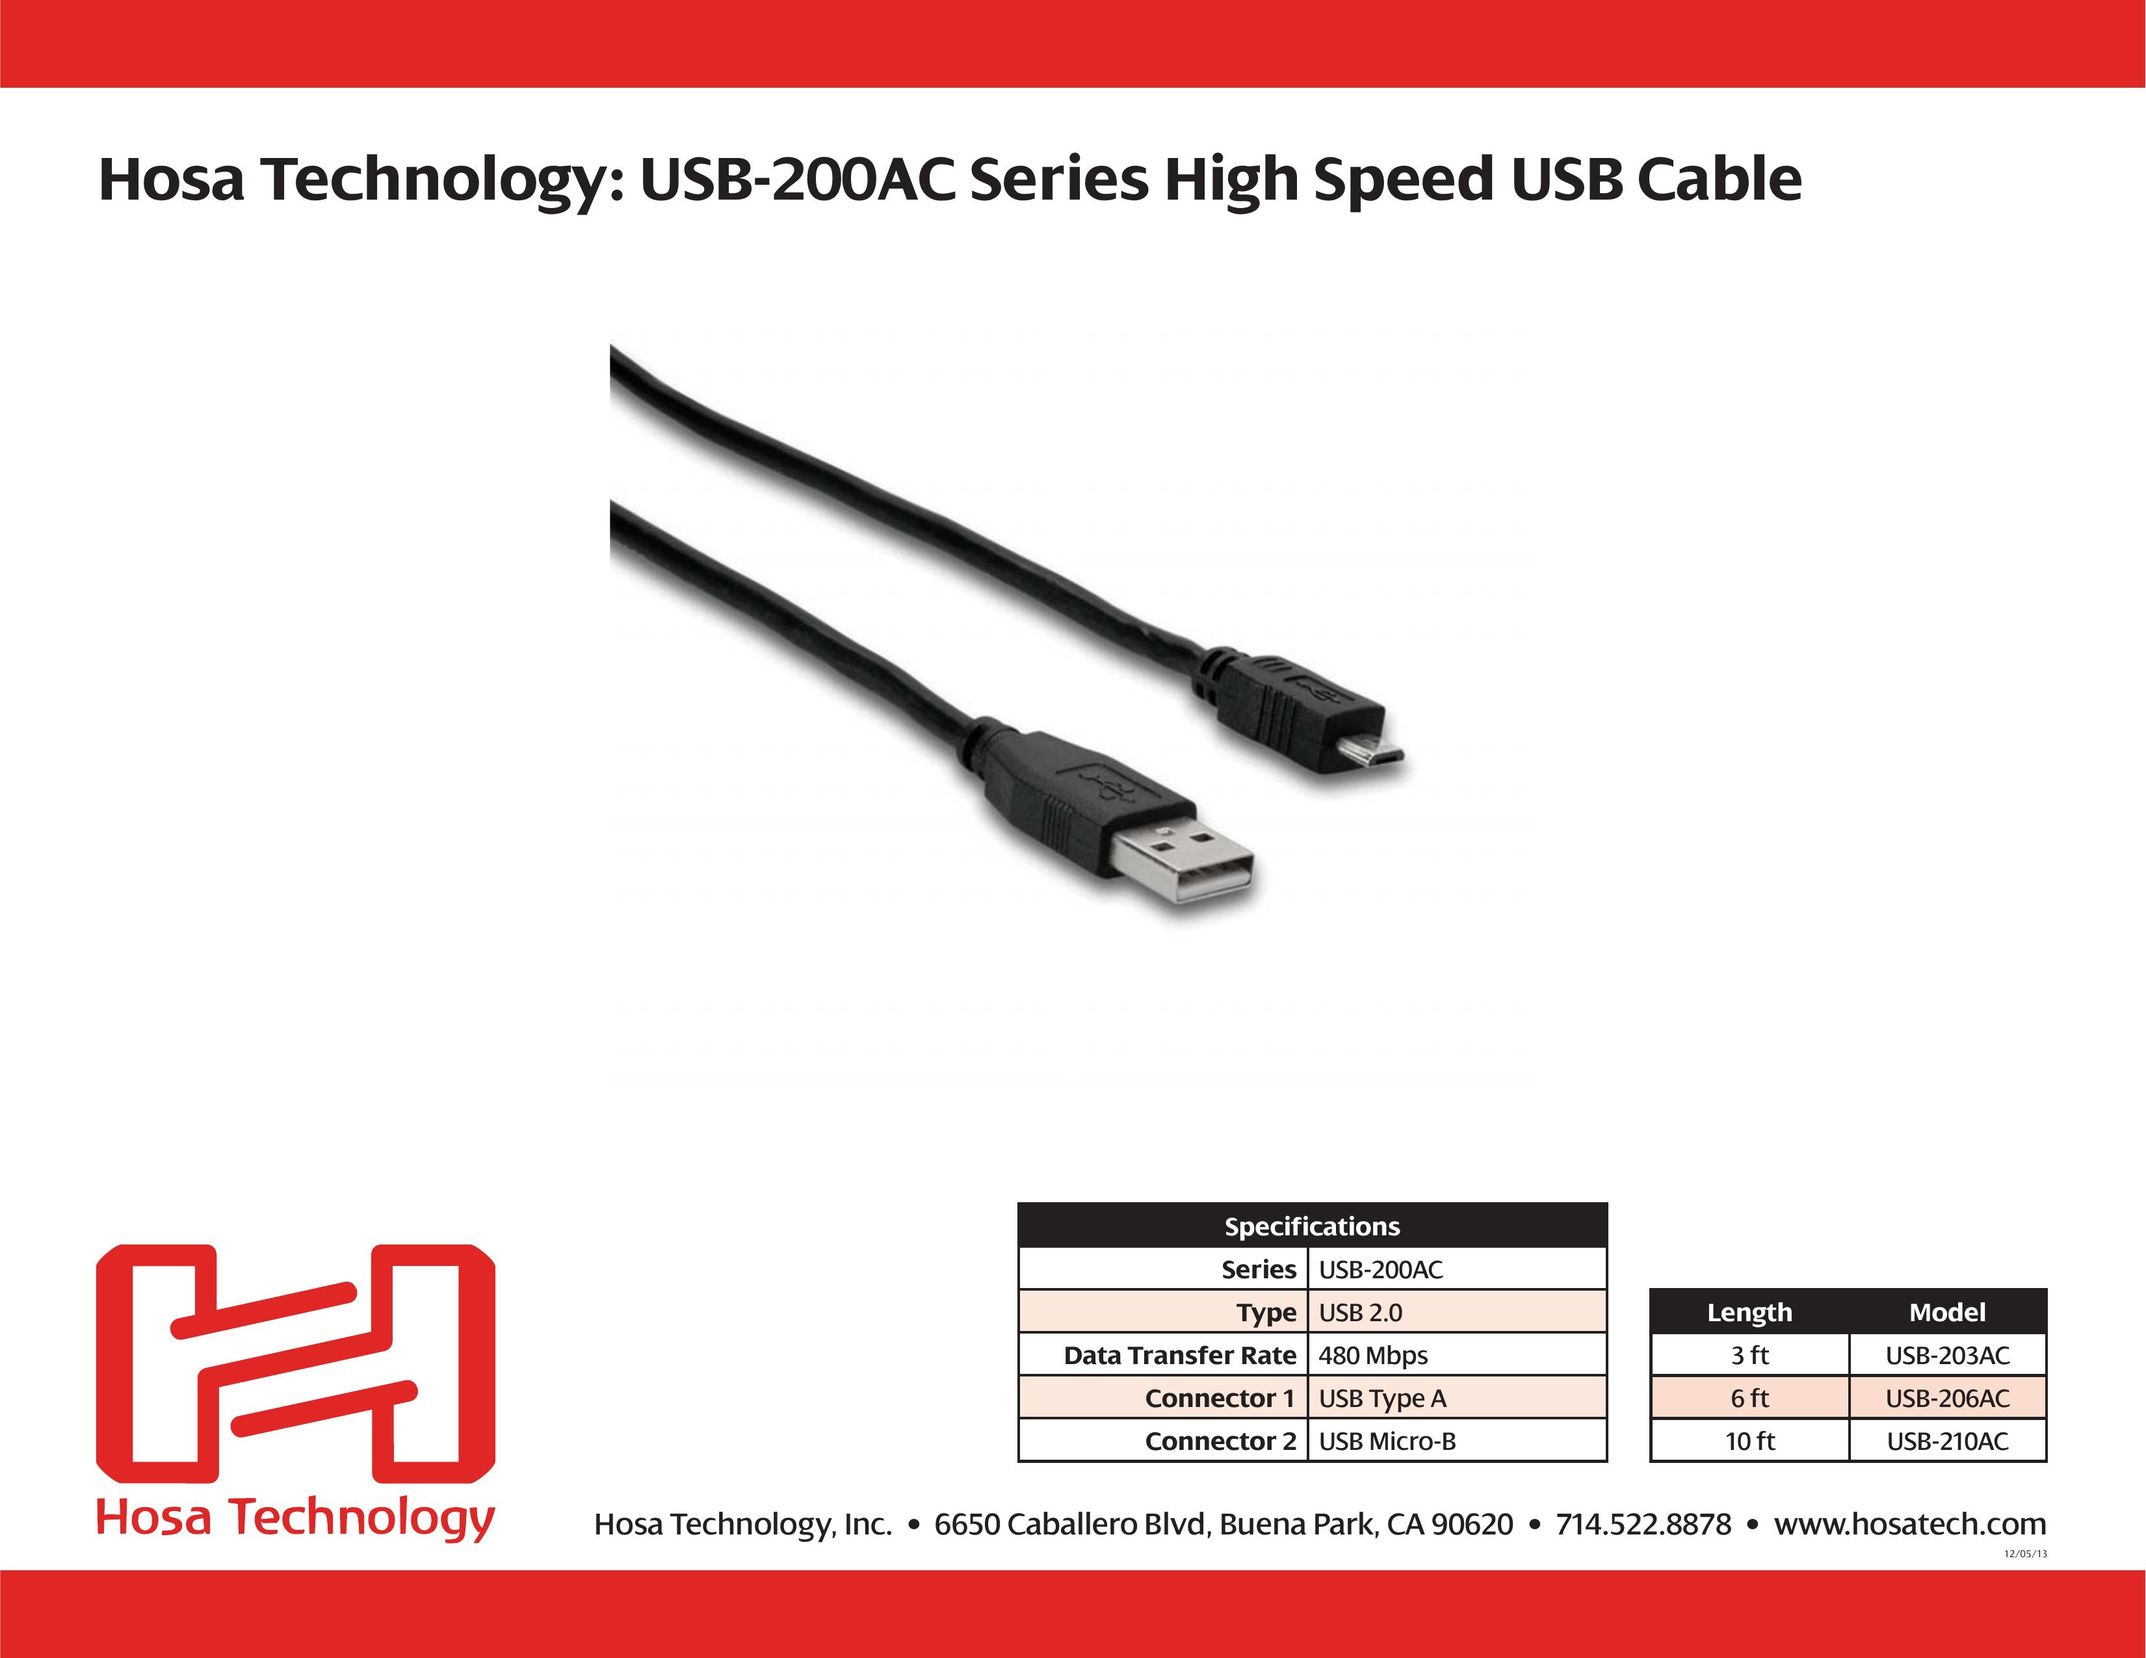 Hosa Technology USB-203AC Network Cables User Manual